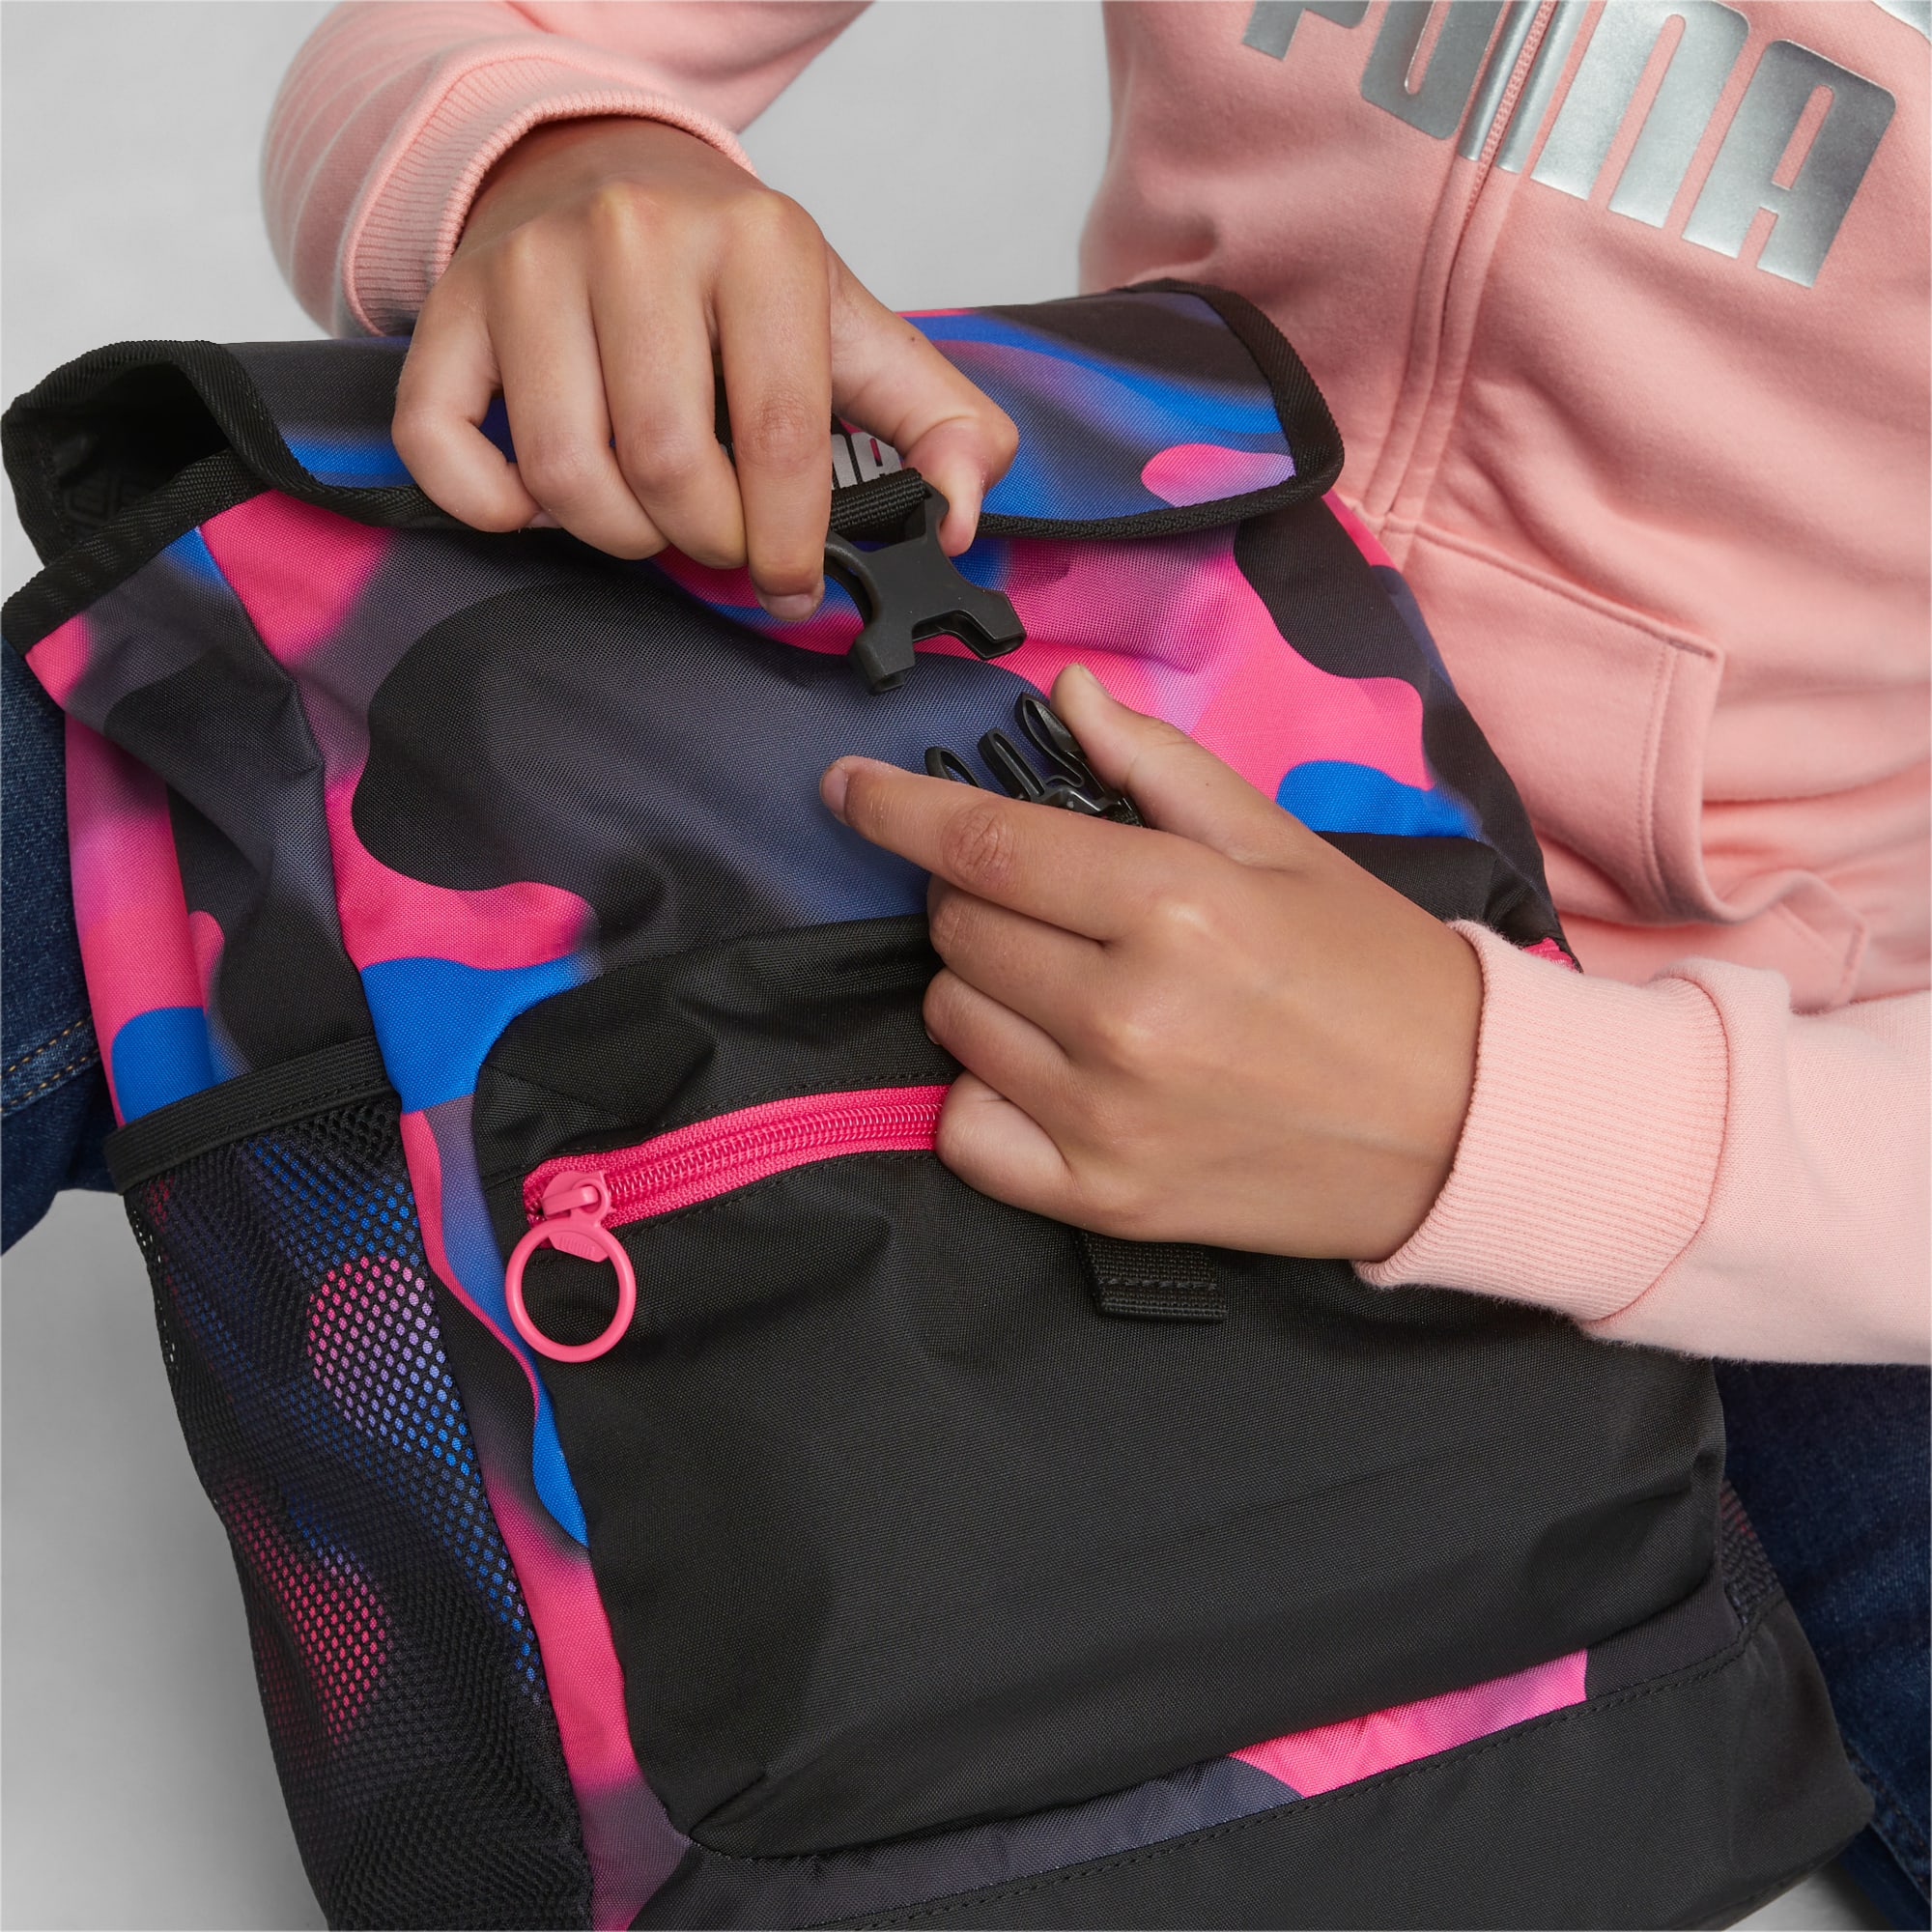 PUMA Cosmic Girl Youth Backpack, Black/Glowing Pink, Accessories